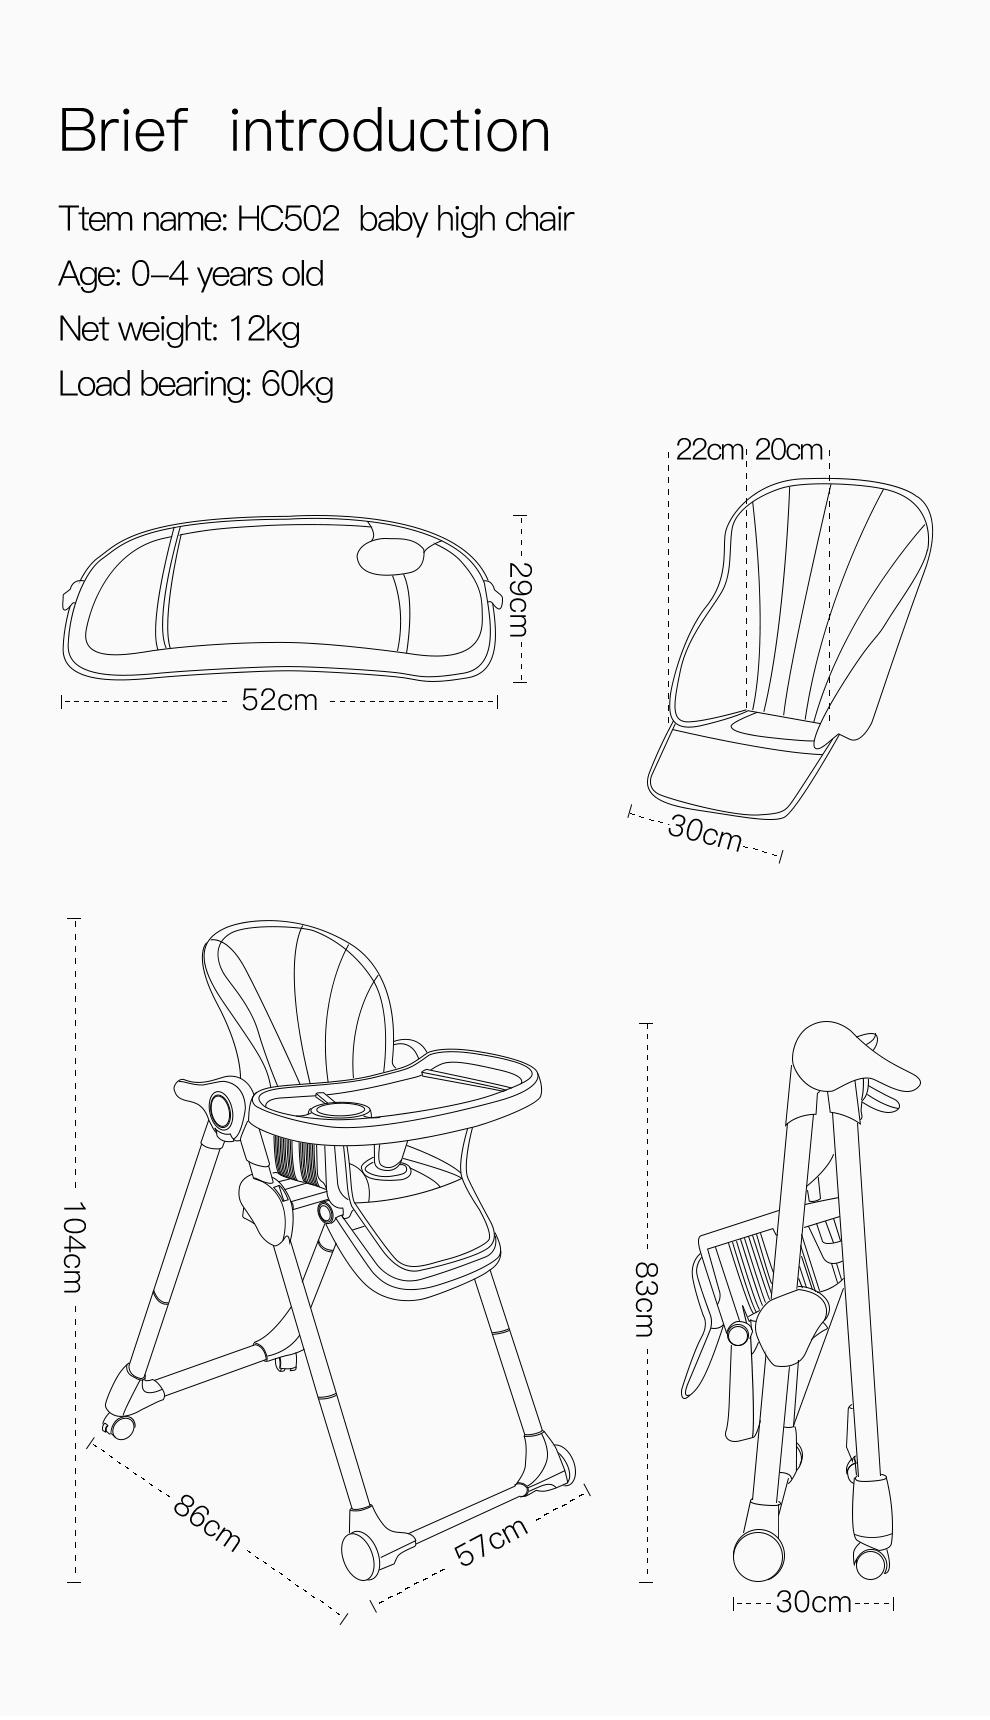 3 in 1 Babies High Chairs Safety Chairs Baby Chair Plastic Baby Eating Chair